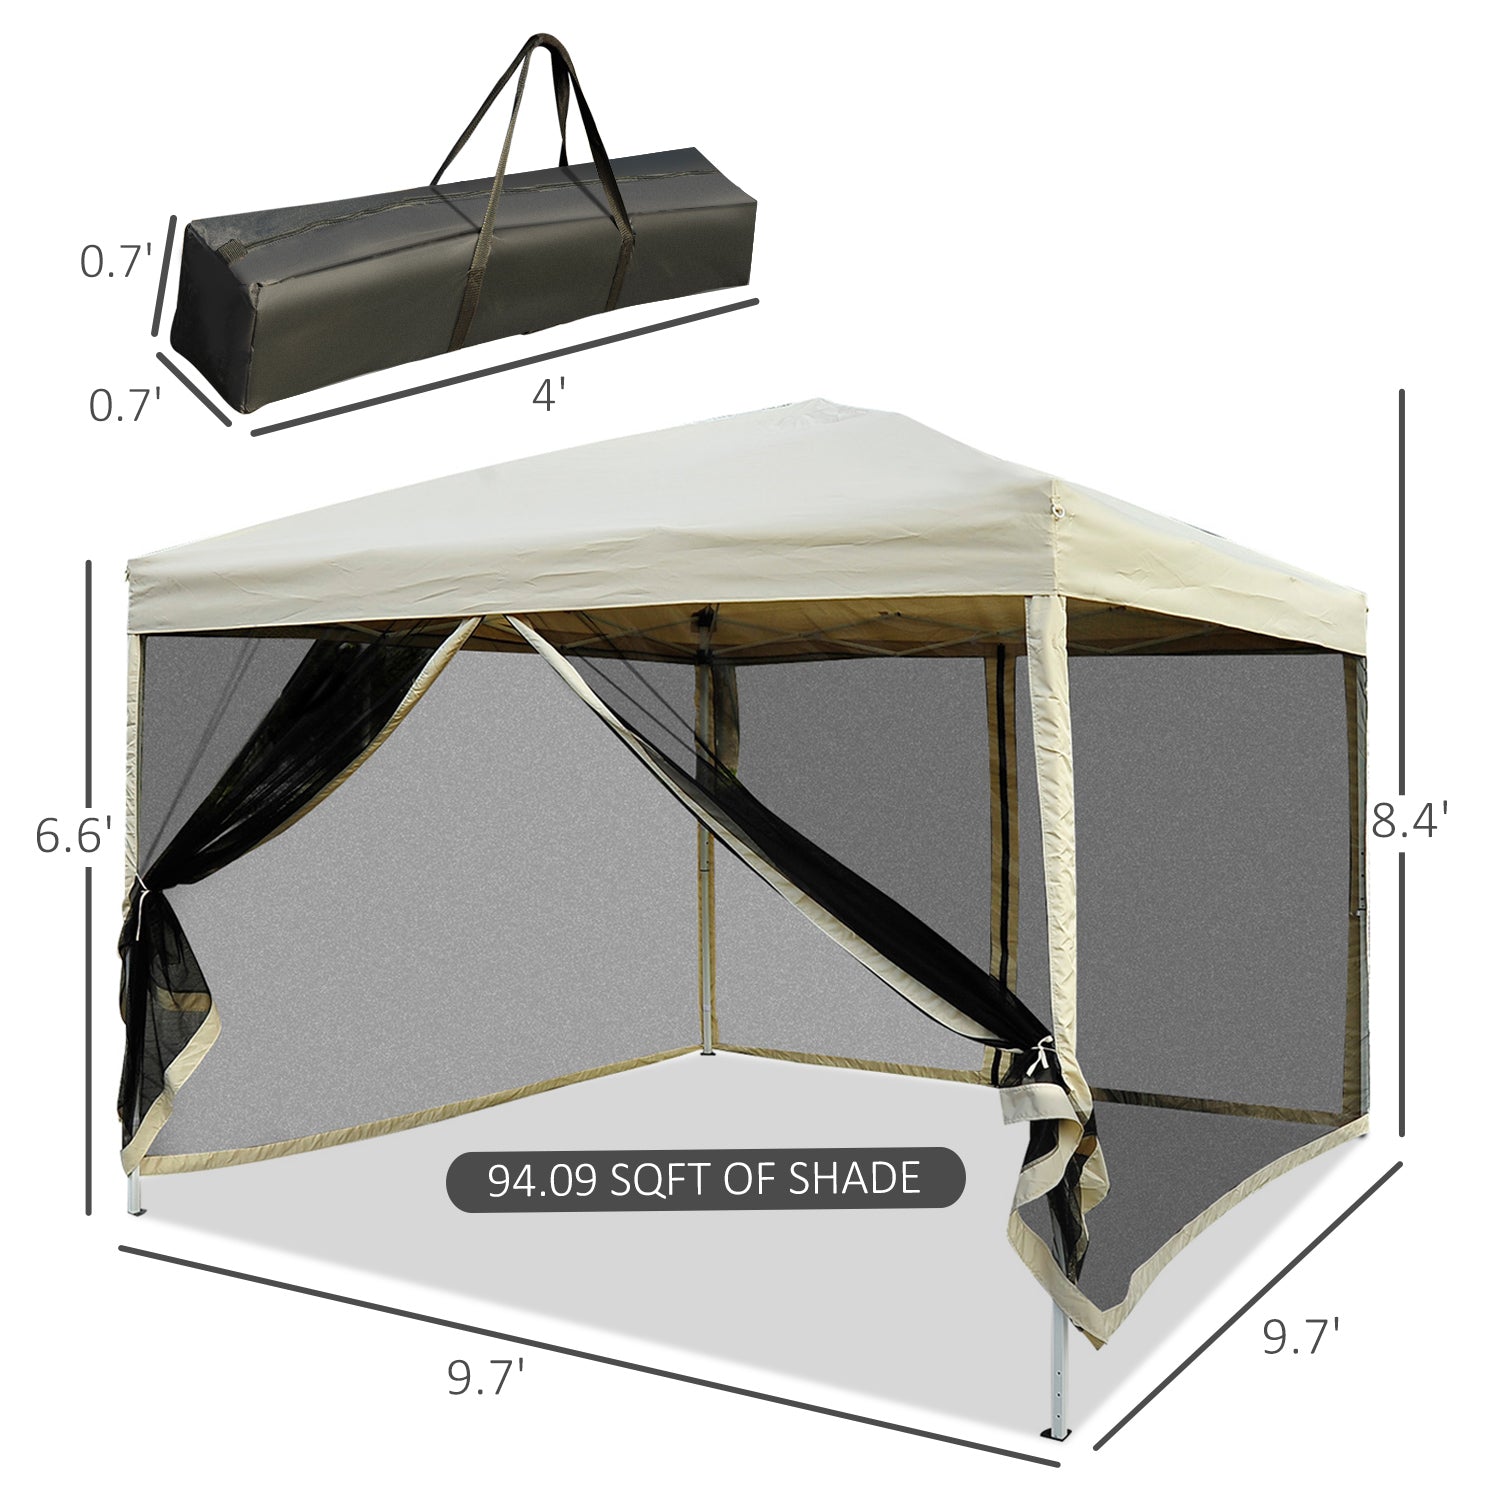 10' x 10' Pop Up Canopy Tent, Foldable Party Tent with Breathable Mesh Sidewalls, Easy Height Adjustable, Carrying Bag for Backyard Garden Patio at Gallery Canada